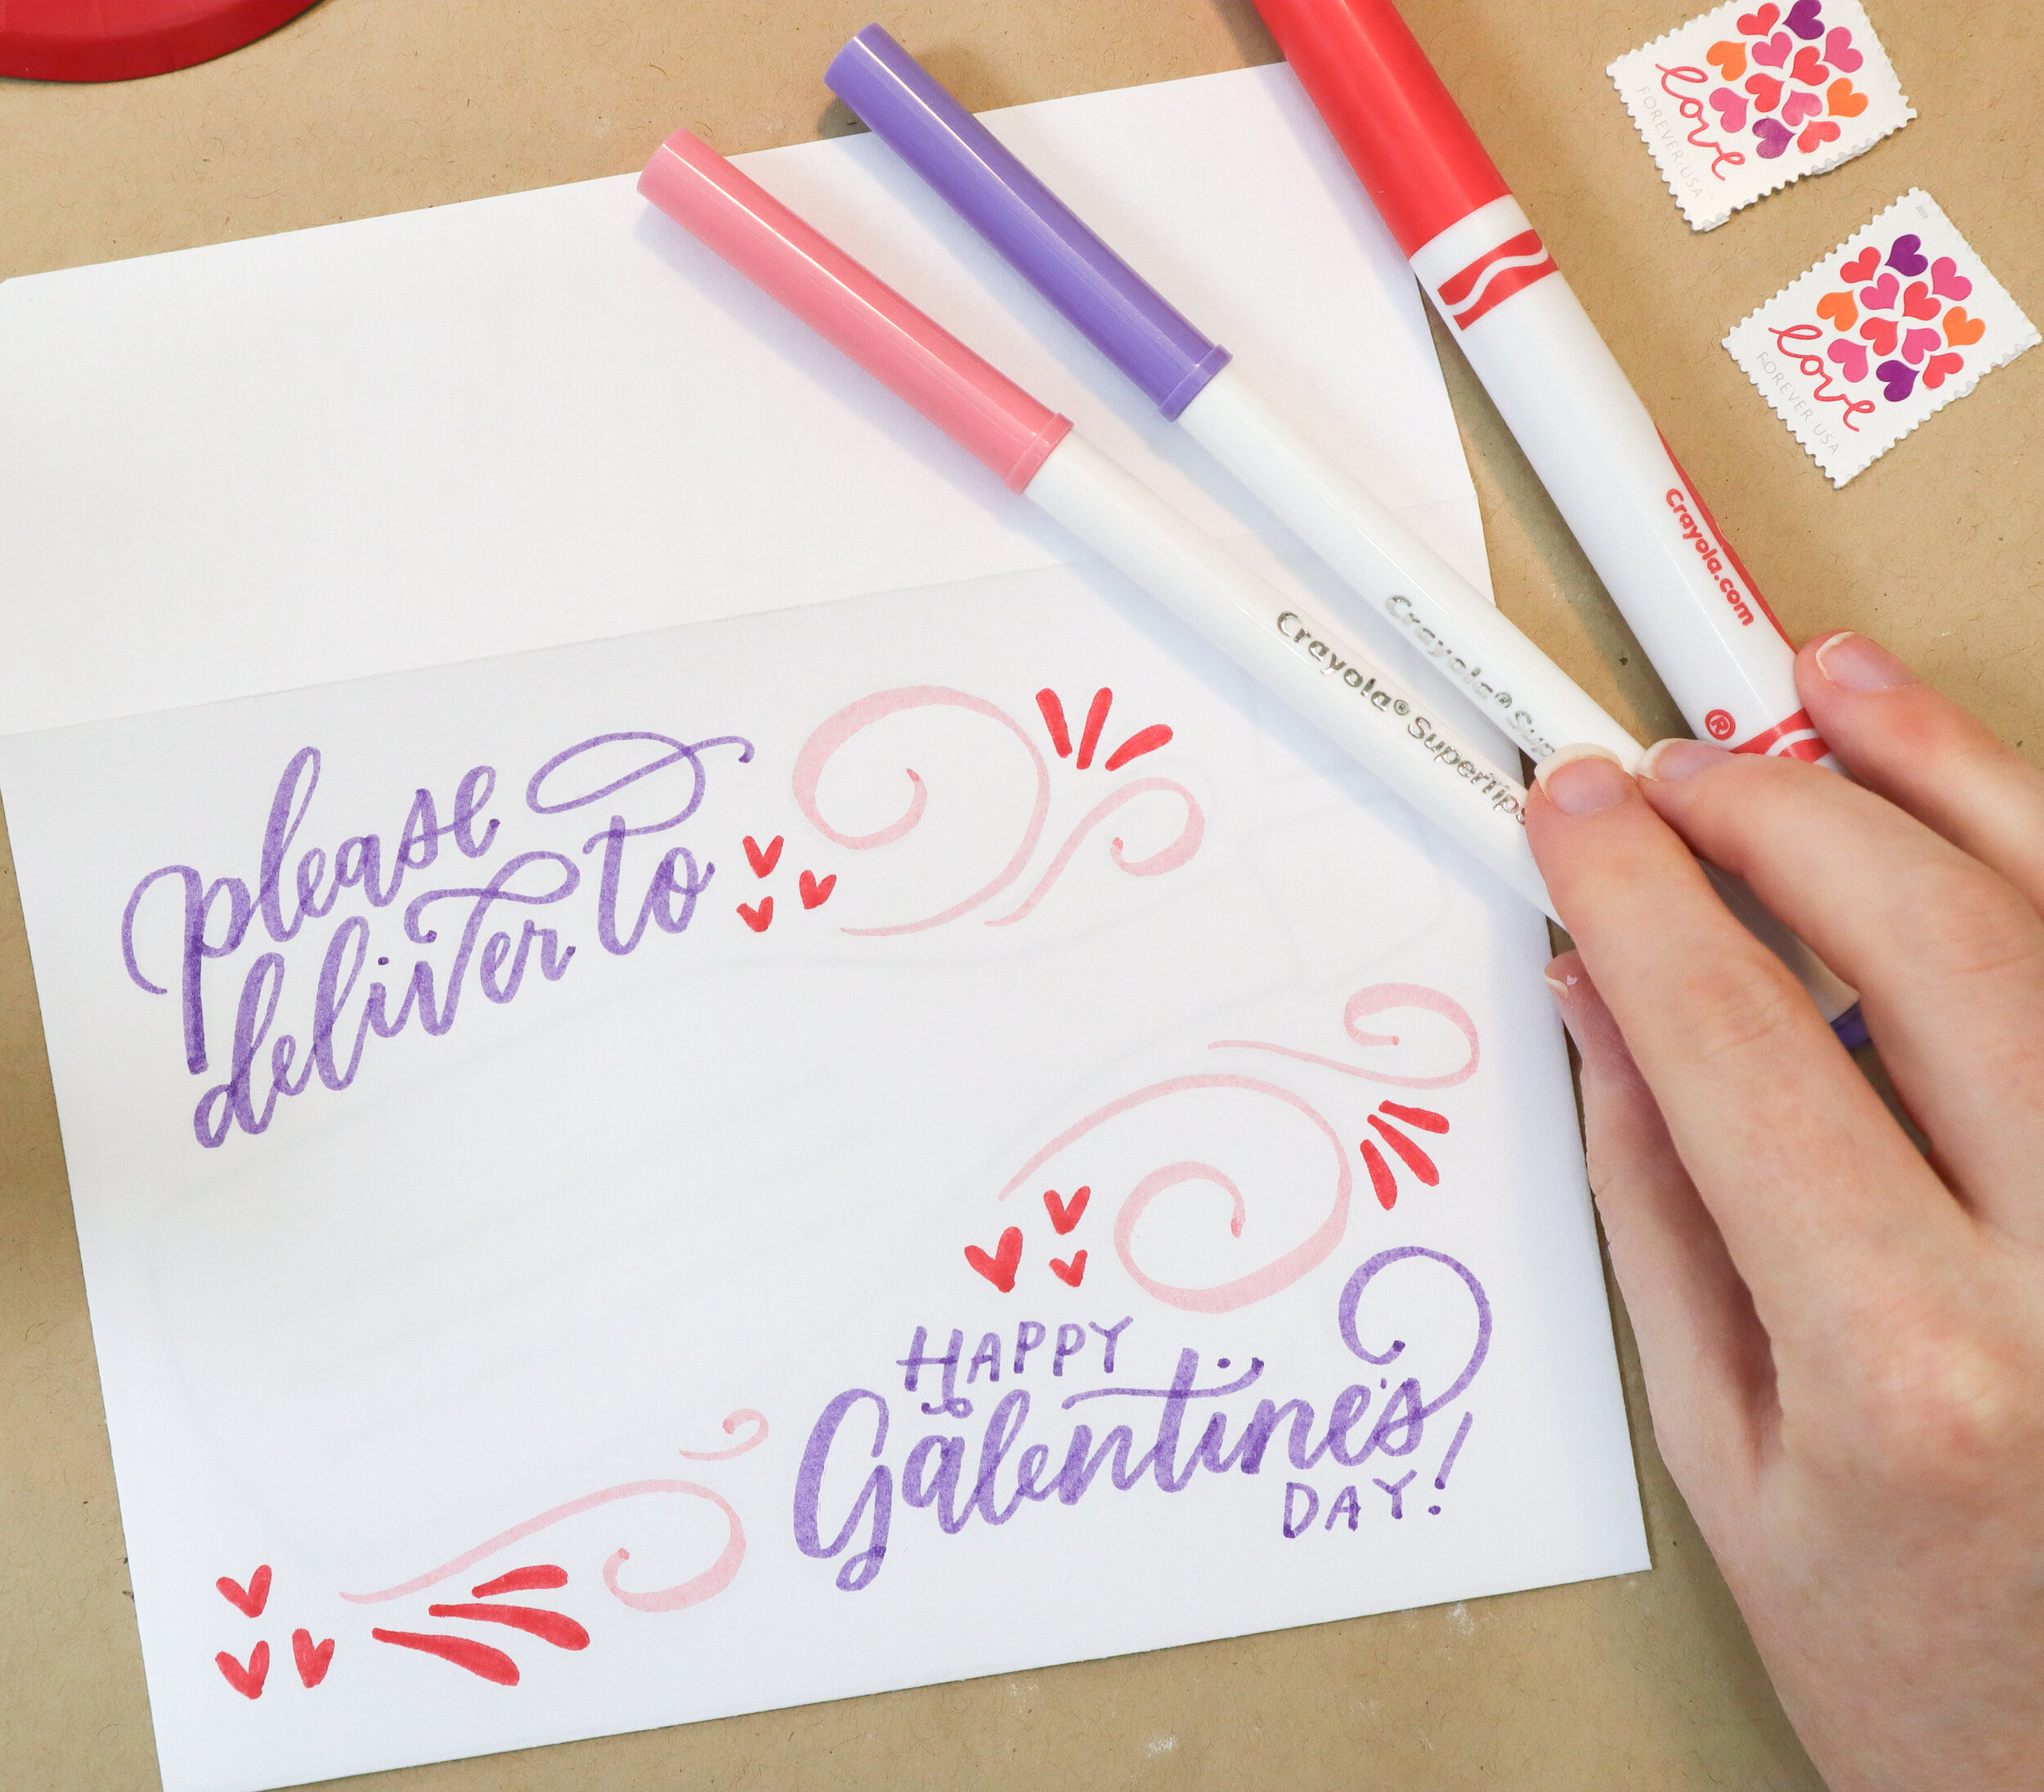 Galentine's Champagne Mail Art Tutorial | Hoopla! Letters